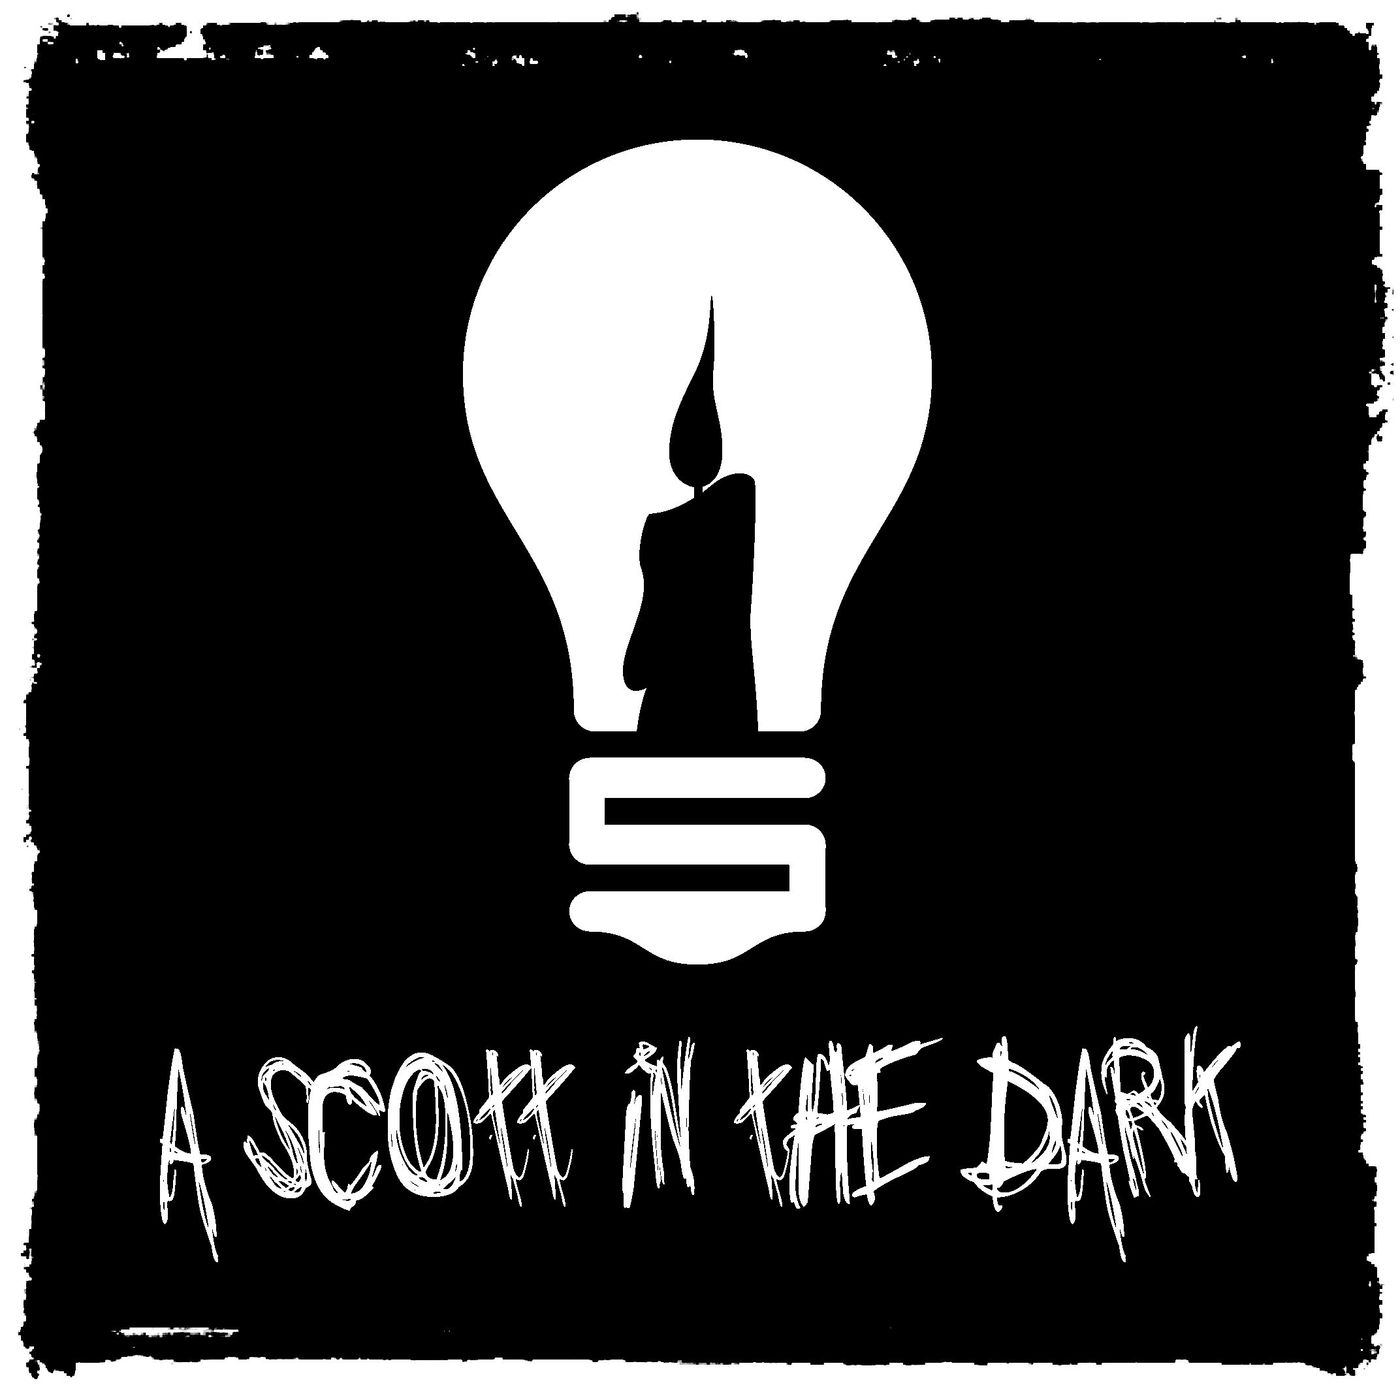 [A Scott in the Dark] Episode 23: When the Tide Comes in All Ships Rise